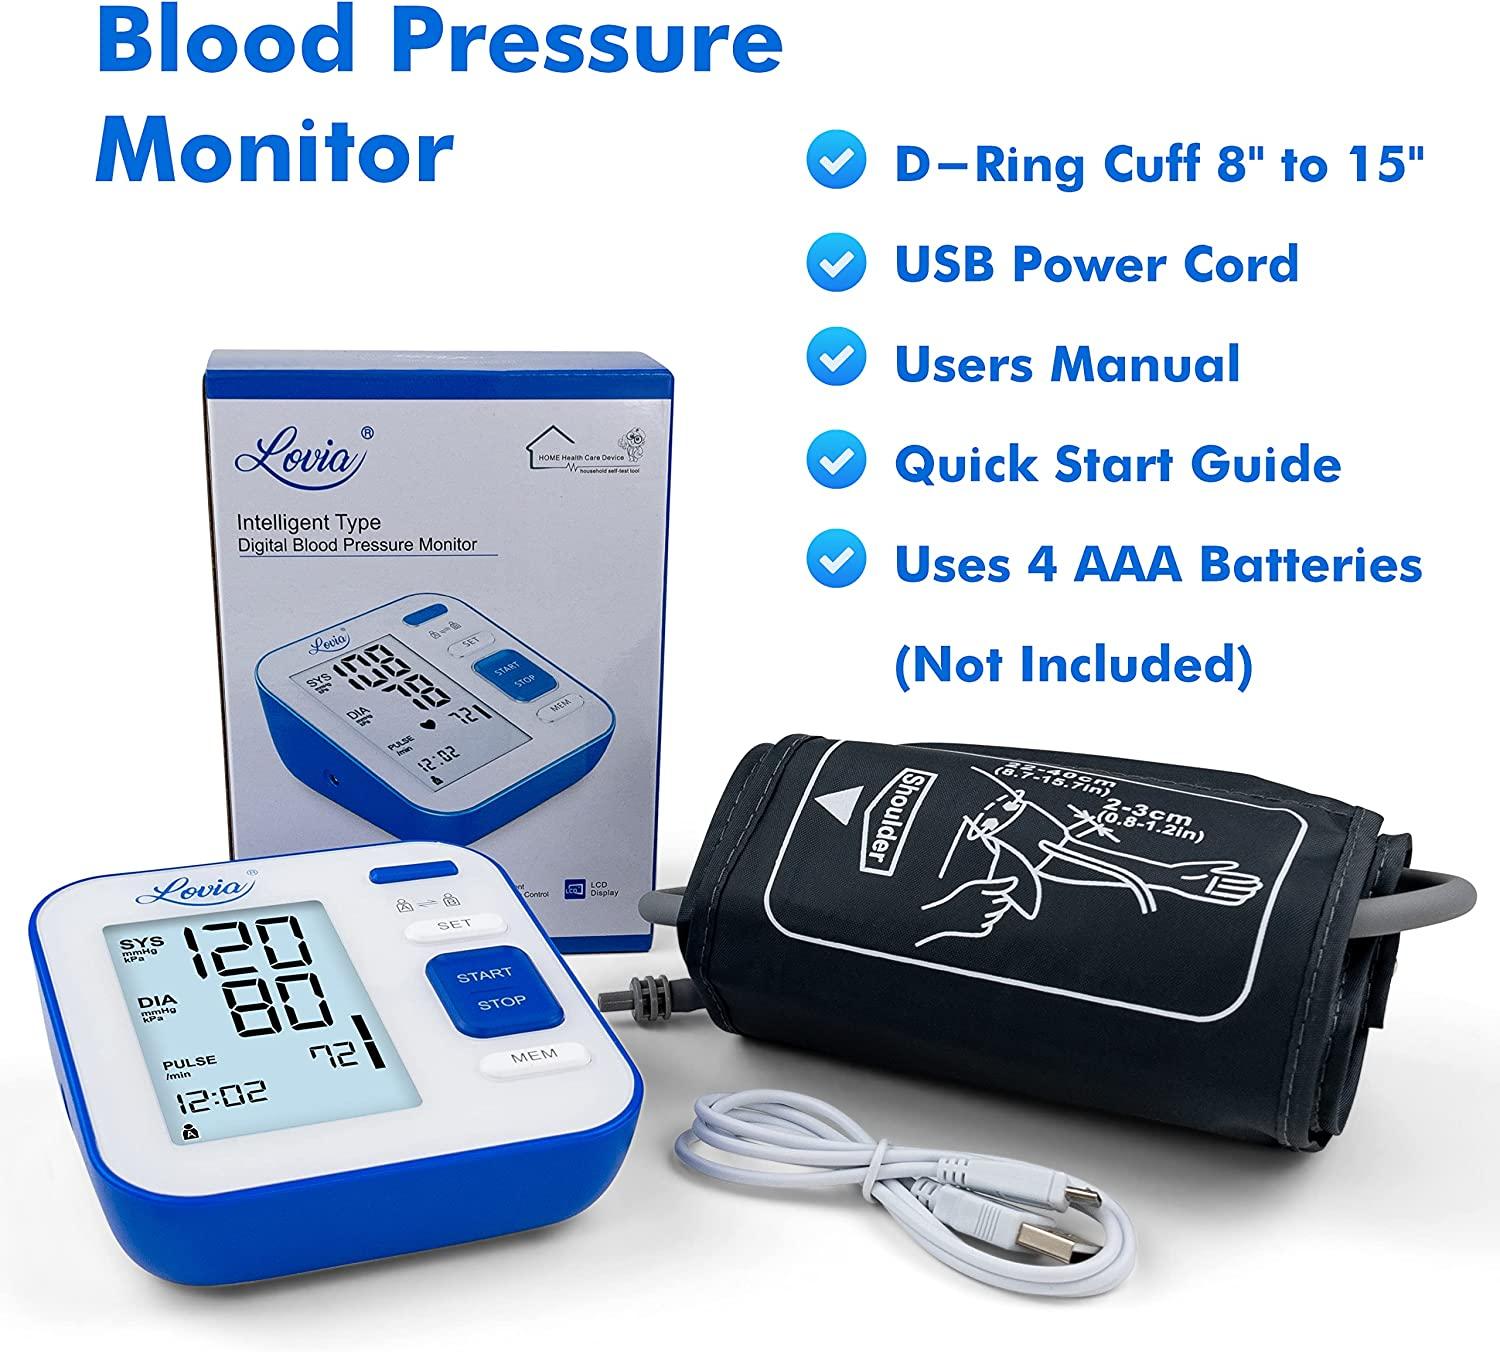 Blood Pressure Monitor for Upper Arm, LOVIA Accurate Automat